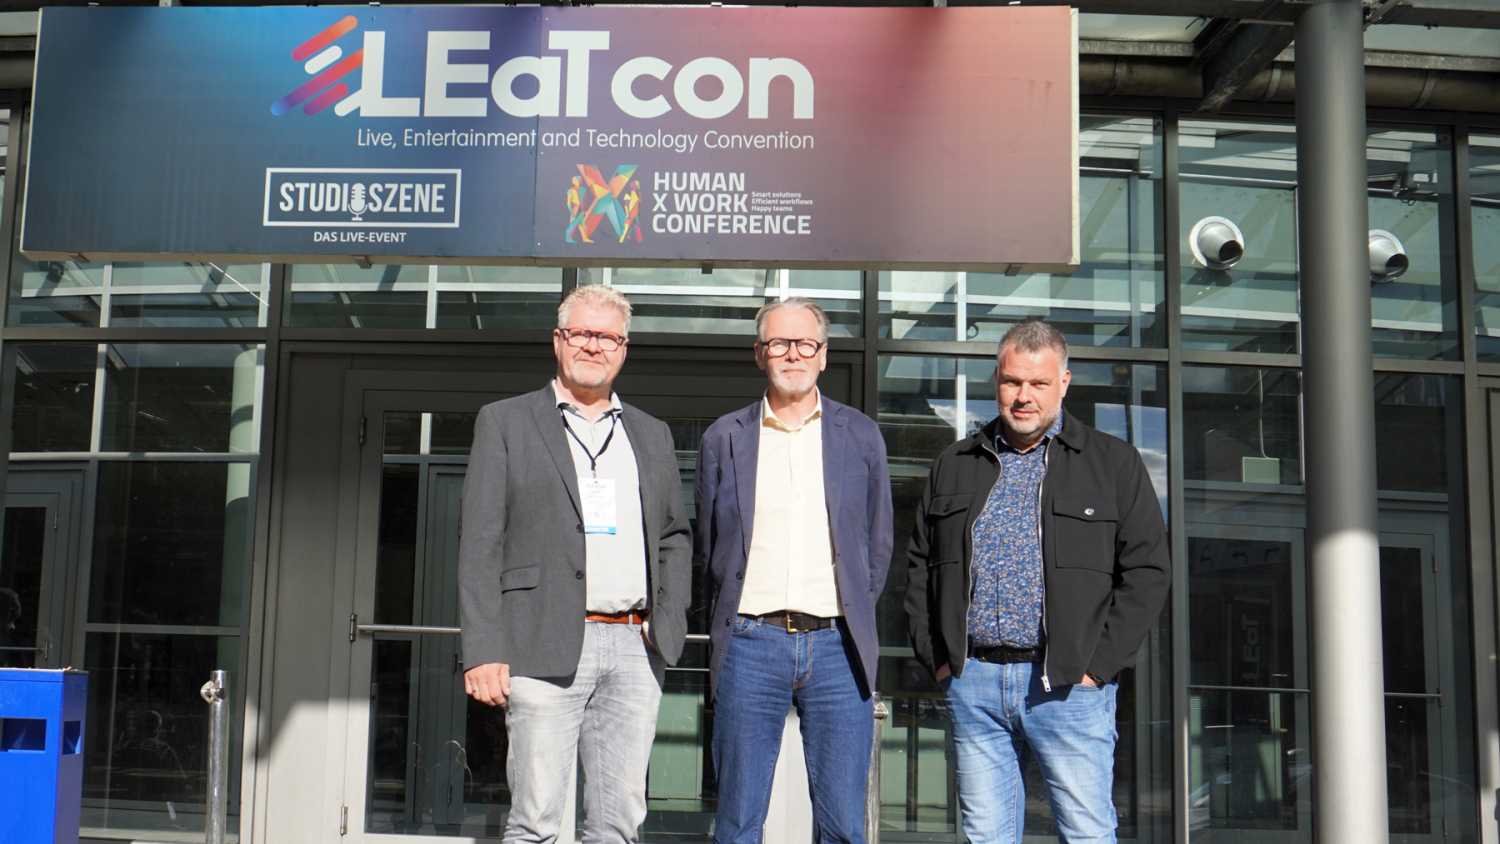 Trius owner and founder Hubert Dierselhuis, Blue5 Technology managing director David Budge and Trius general manager Kai Boeckmann at LEat con 2023